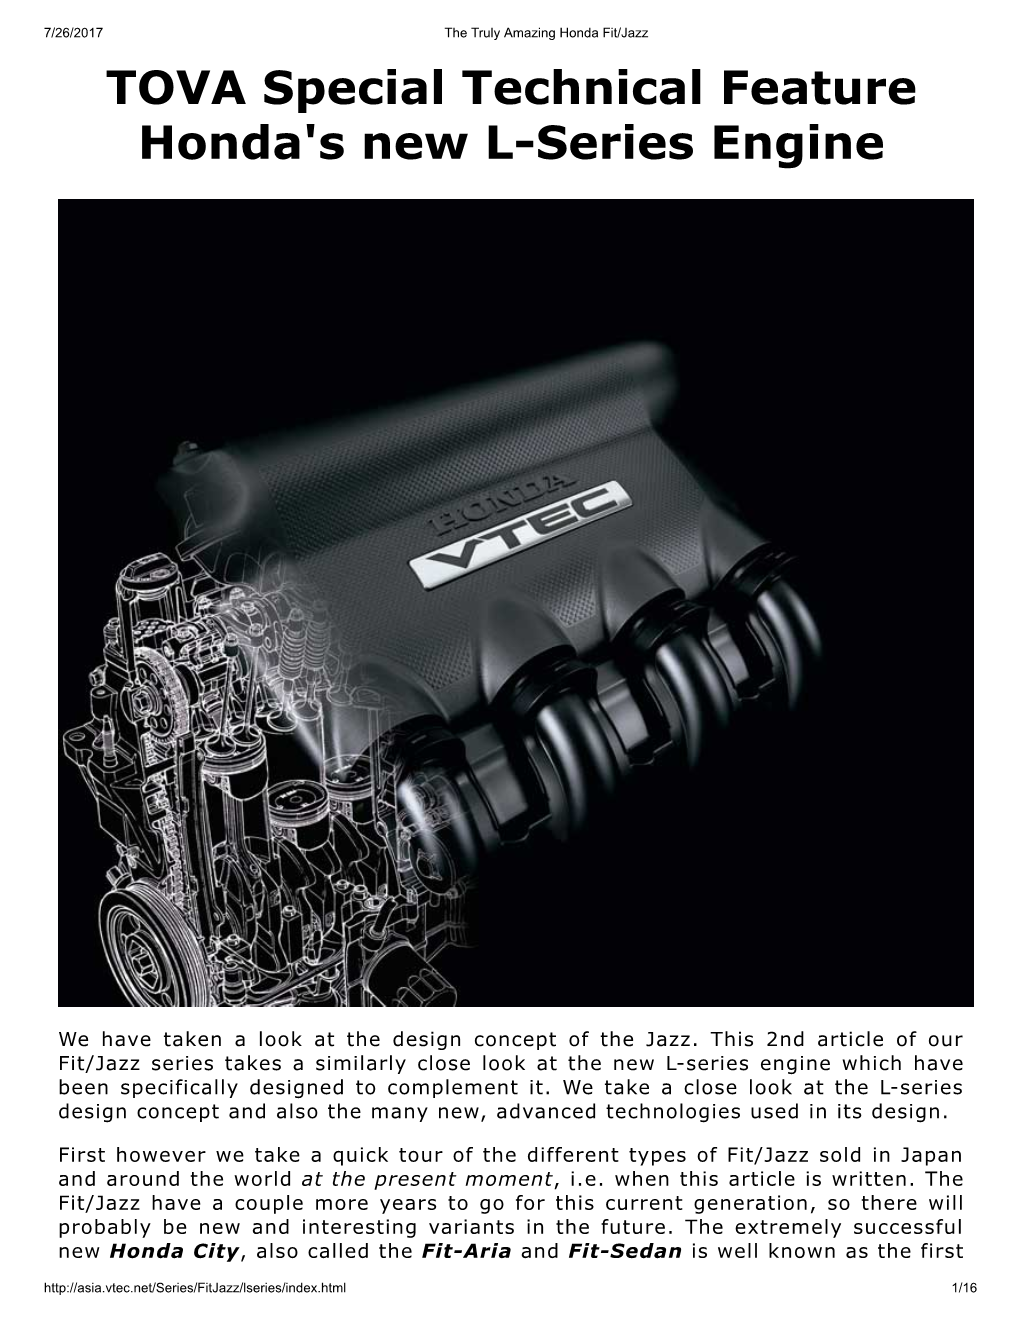 TOVA Special Technical Feature Honda's New L-Series Engine